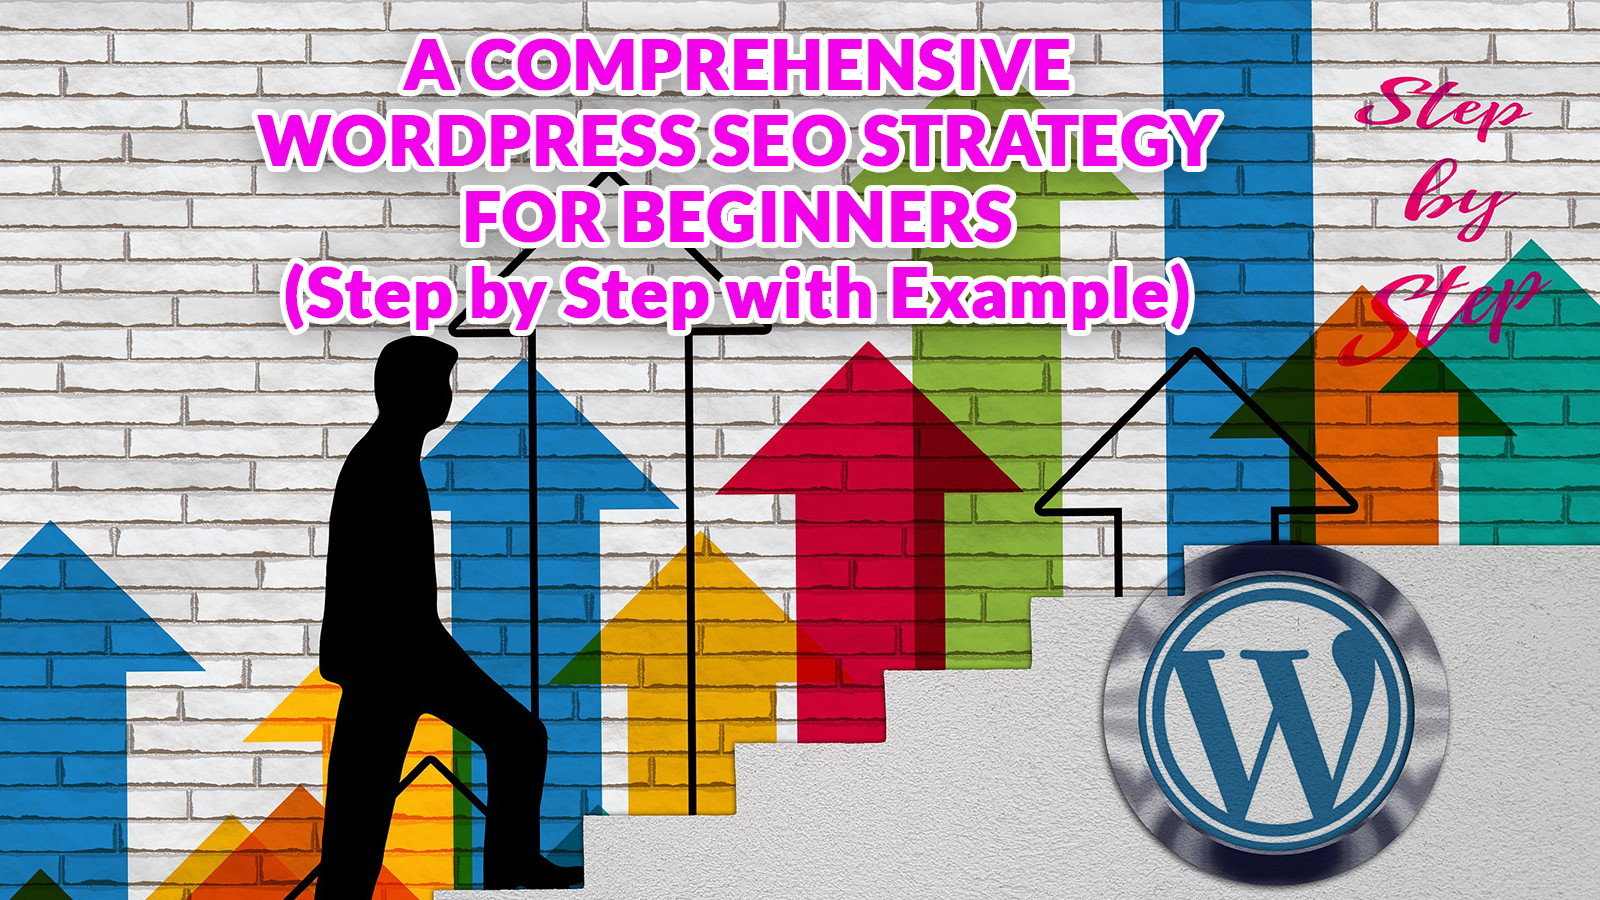 A Comprehensive WordPress SEO Strategy for Beginners (Step by Step with Example)